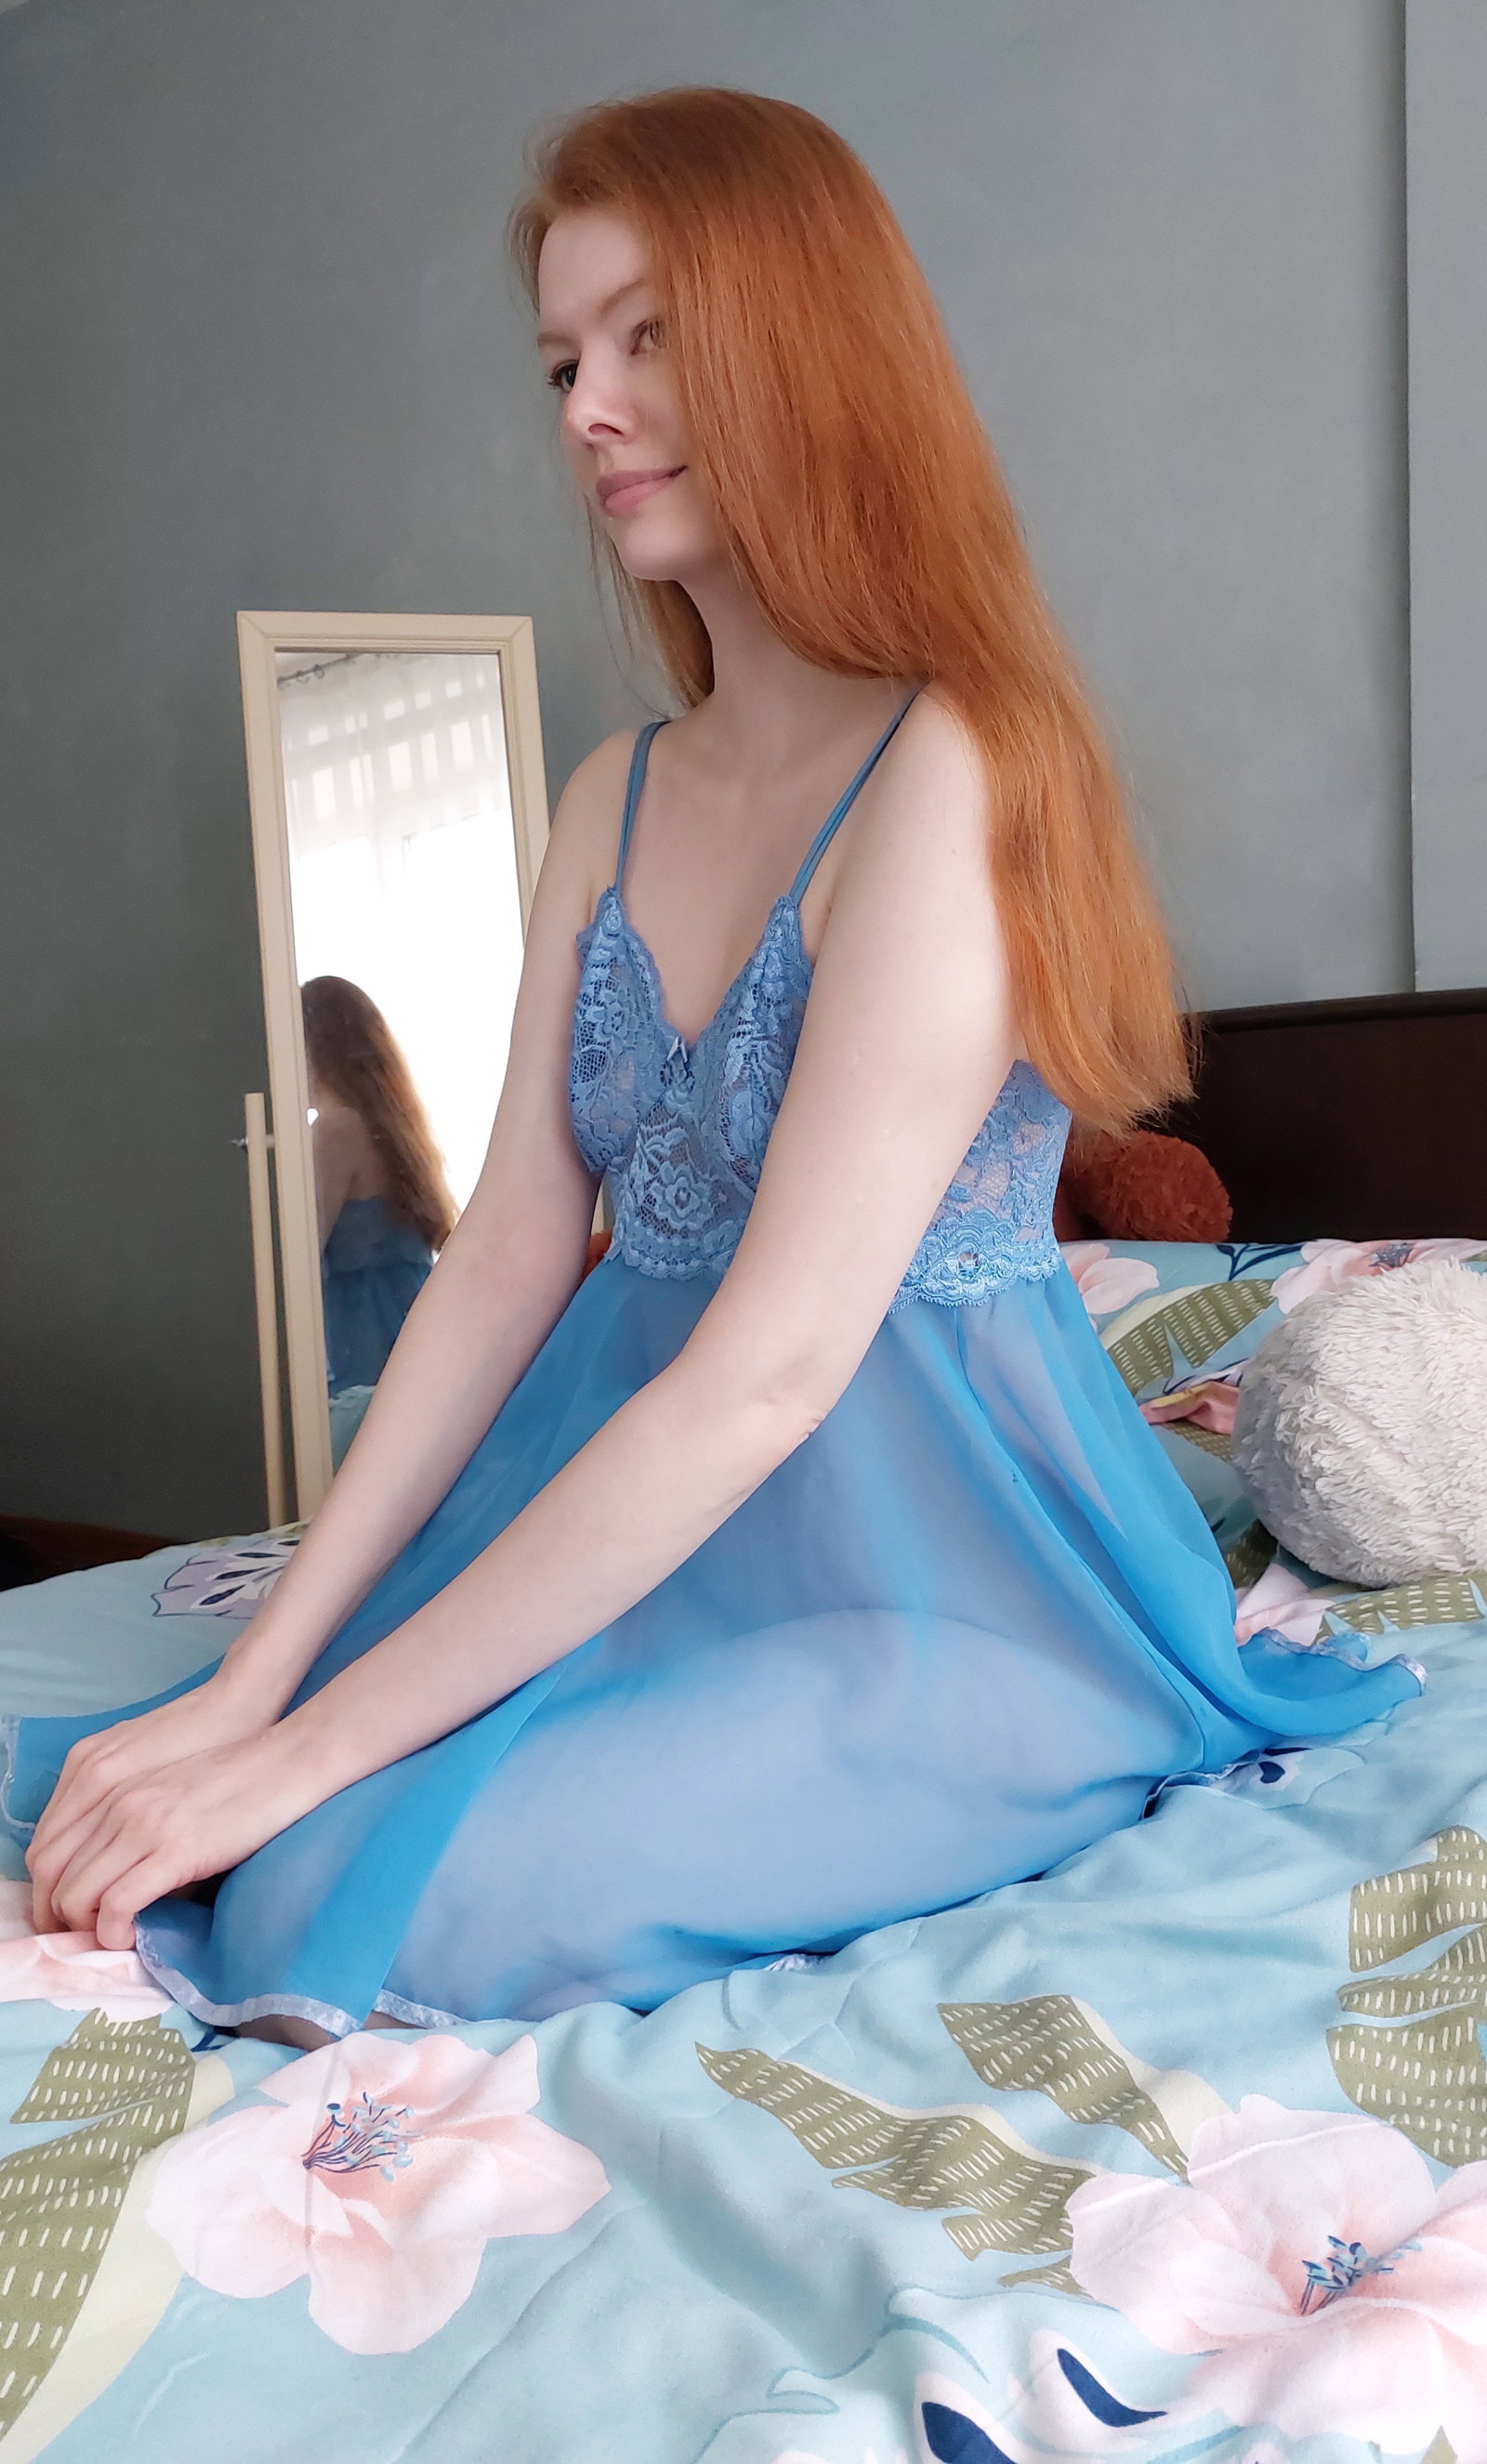 Photo by Lady inari with the username @Ladyinari, who is a star user,  May 9, 2024 at 9:23 PM and the text says 'Me and you?😉 You can't resist a red-haired beauty! So you're already running to  my stream (
https://frontfanz.com/profile/lady_inari?refid=33376845&campid=default
)  #redhead #ginger #petite #hotgirl #sexy #sweetgirl #joi #cei'